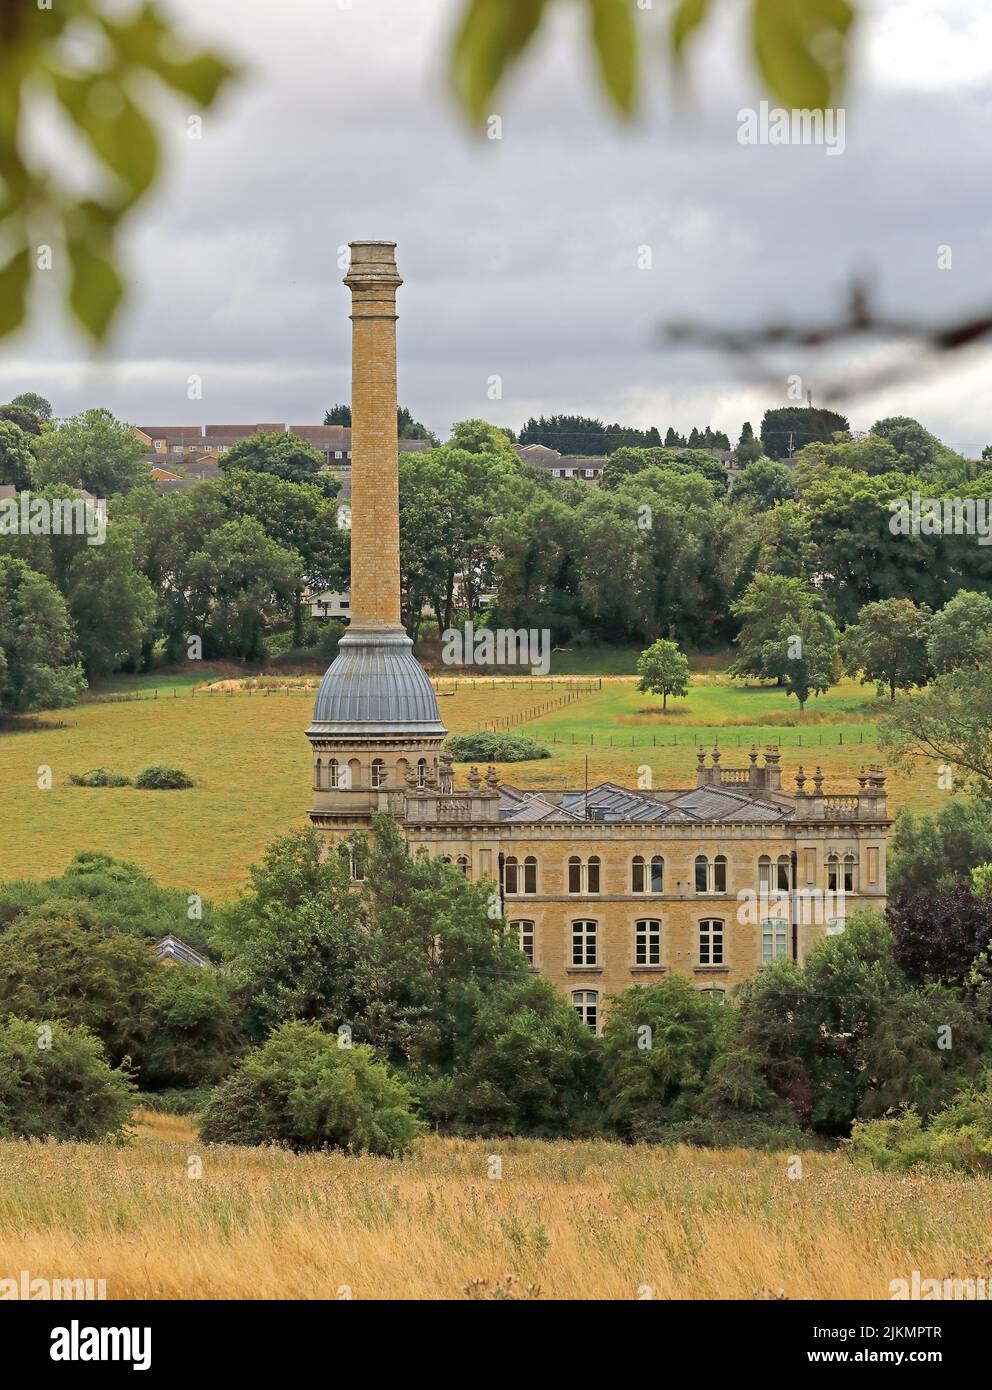 Bliss Historic Tweed Mill, Chipping Norton, Cotswolds, Gloucestershire, England, UK Stockfoto